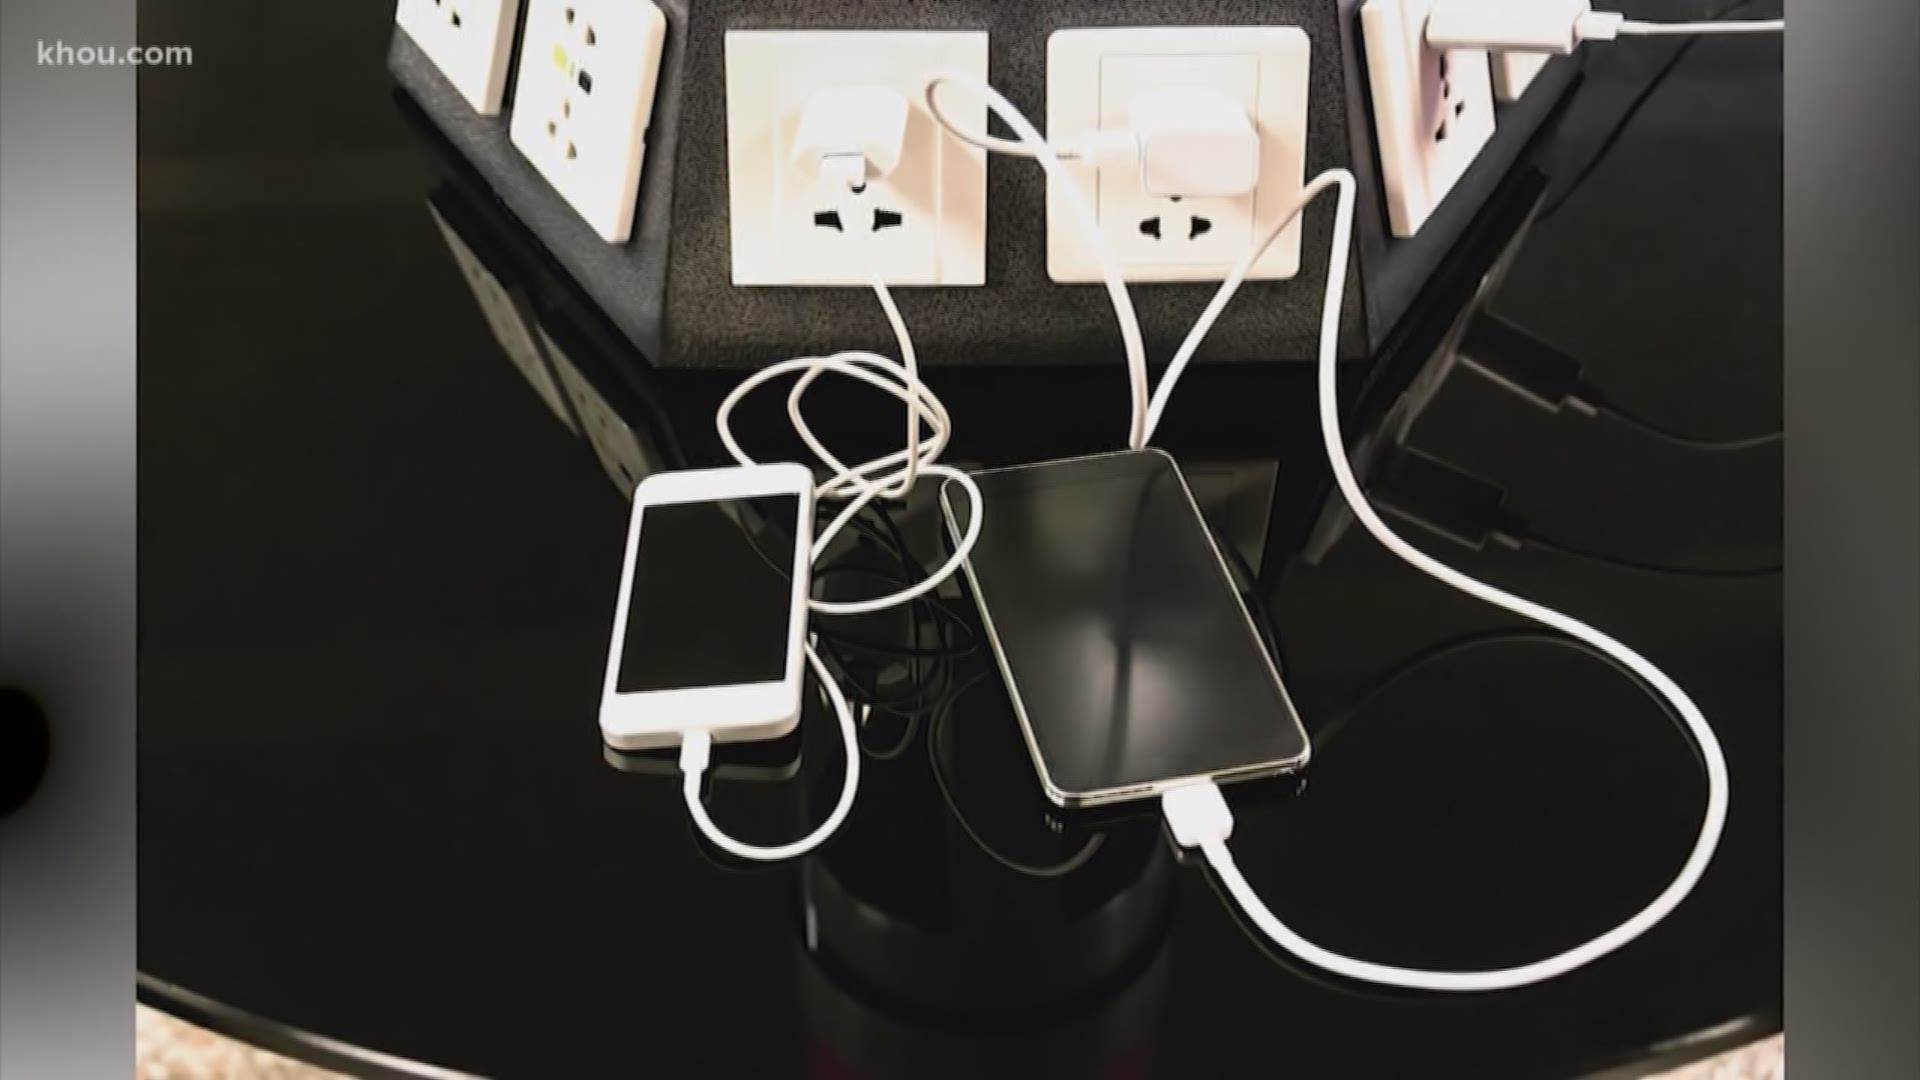 Cyber security experts say stay away from phone charging stations at the airports and the malls. They say those public USB charging stations could have malware.